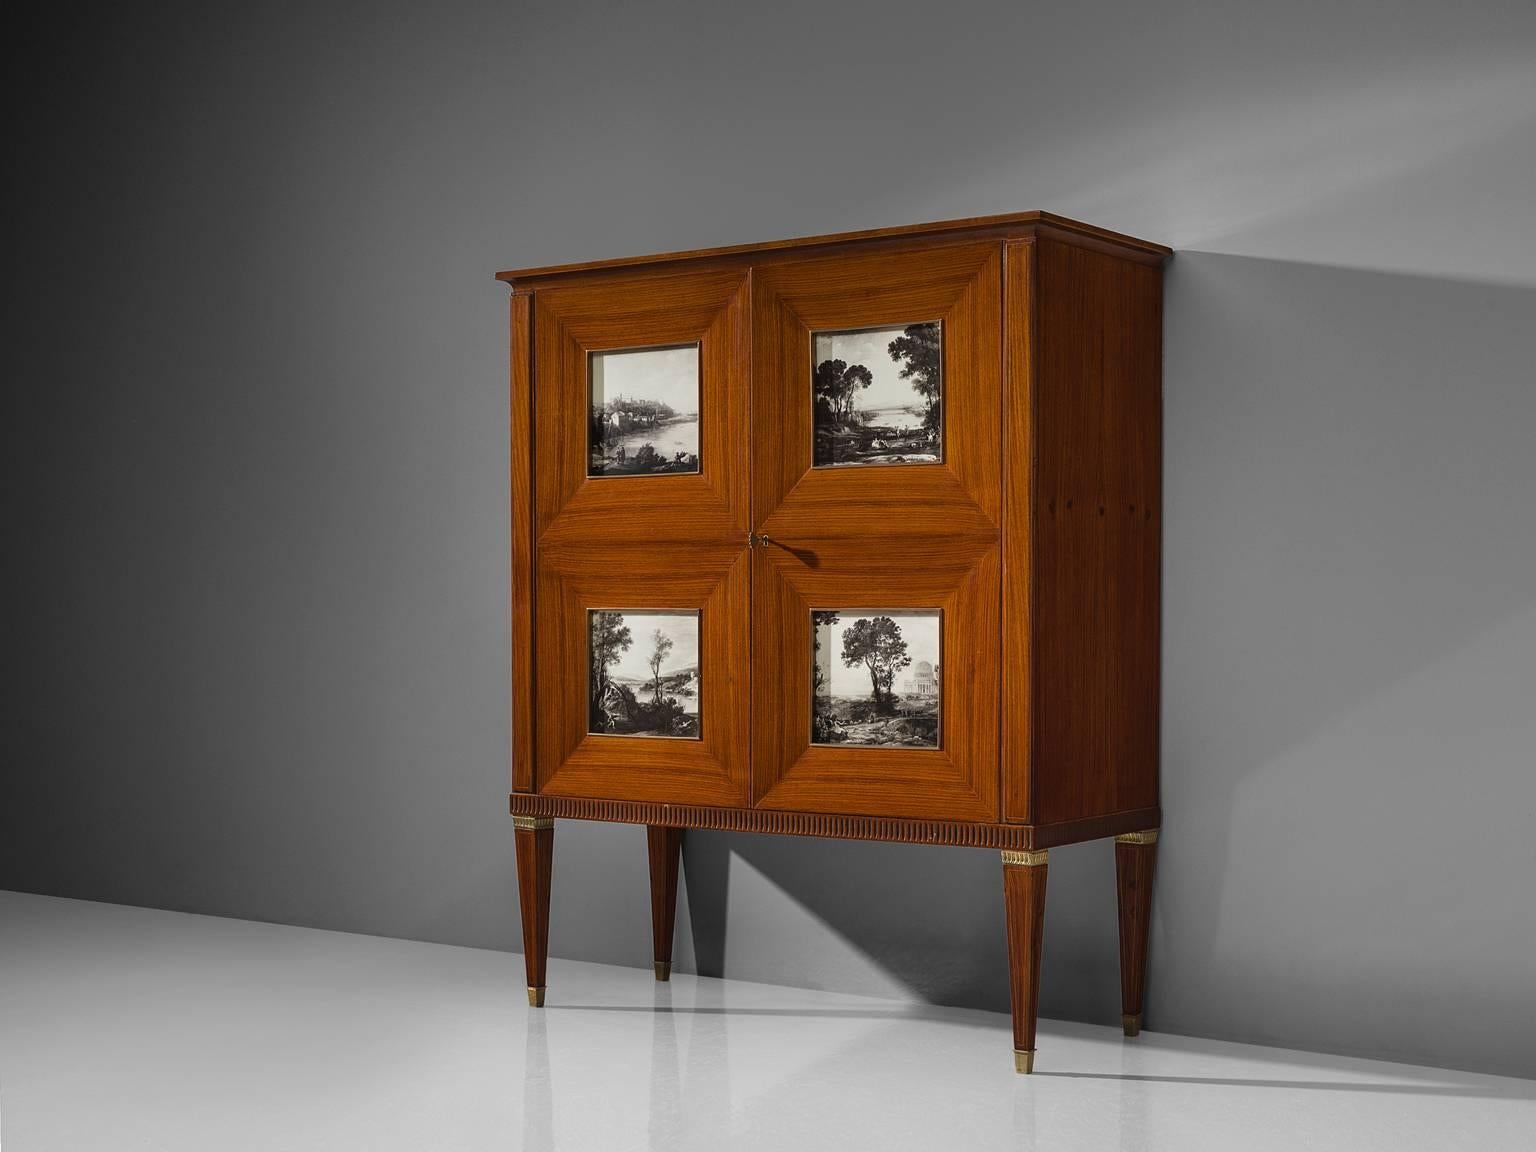 Paolo Buffa, dry bar, cabinet, rosewood, brass and glass, Italy, 1940s. 

This large liquor cabinet with editioned etchings and conical legs is designed by Paulo Buffa. The veneered bar features inlayed patterns in the wood and four windows behind